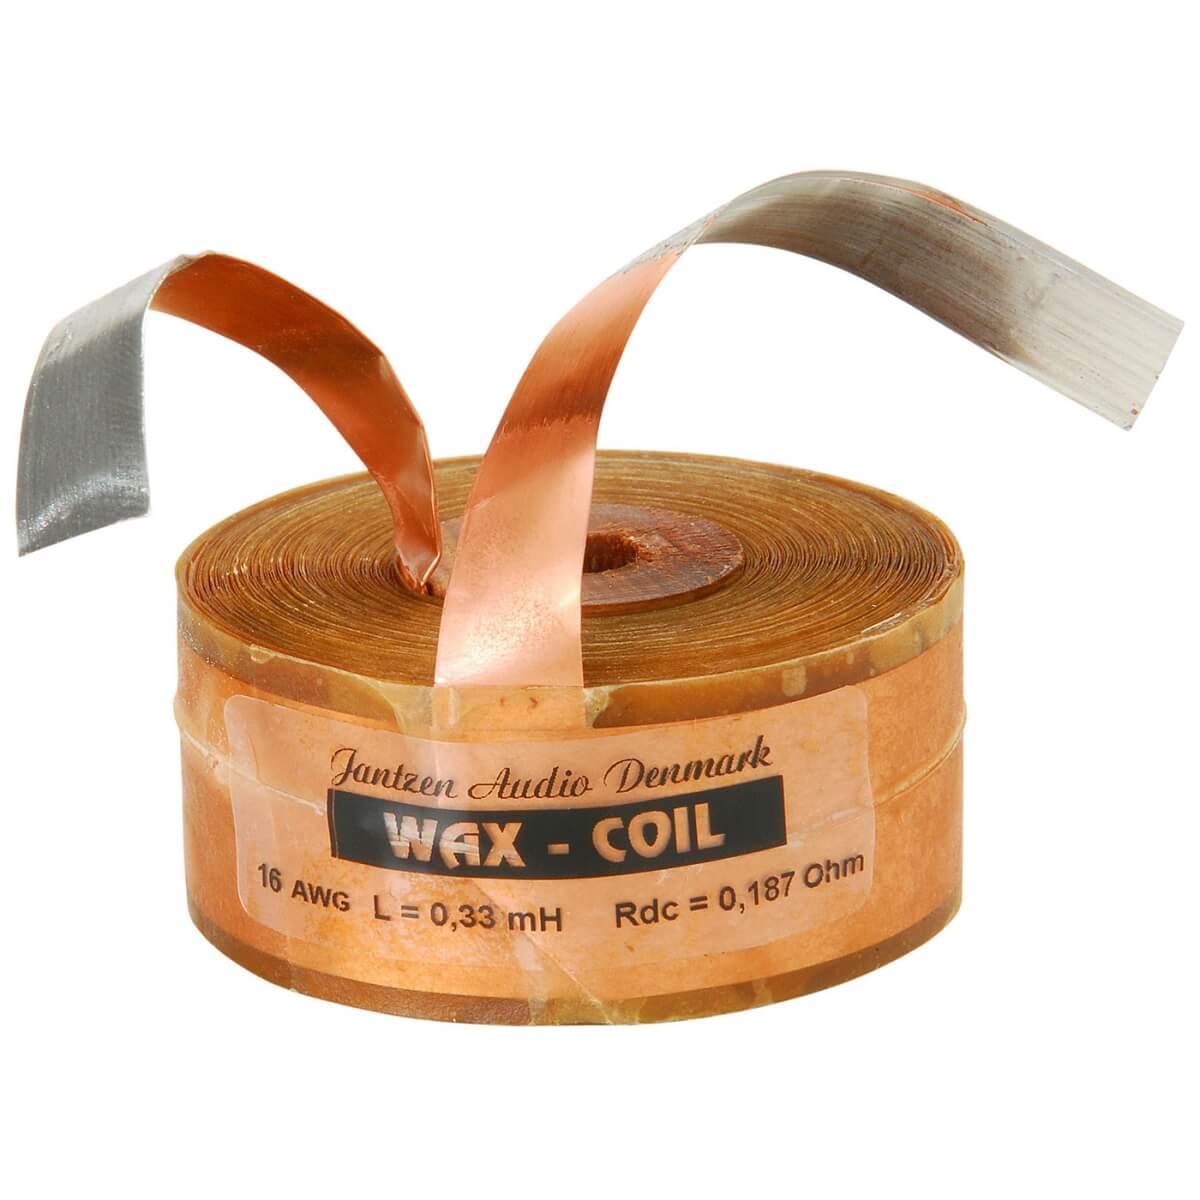 JANTZEN AUDIO WAX COIL Waxed Taped Coil 14AWG 0.38mH